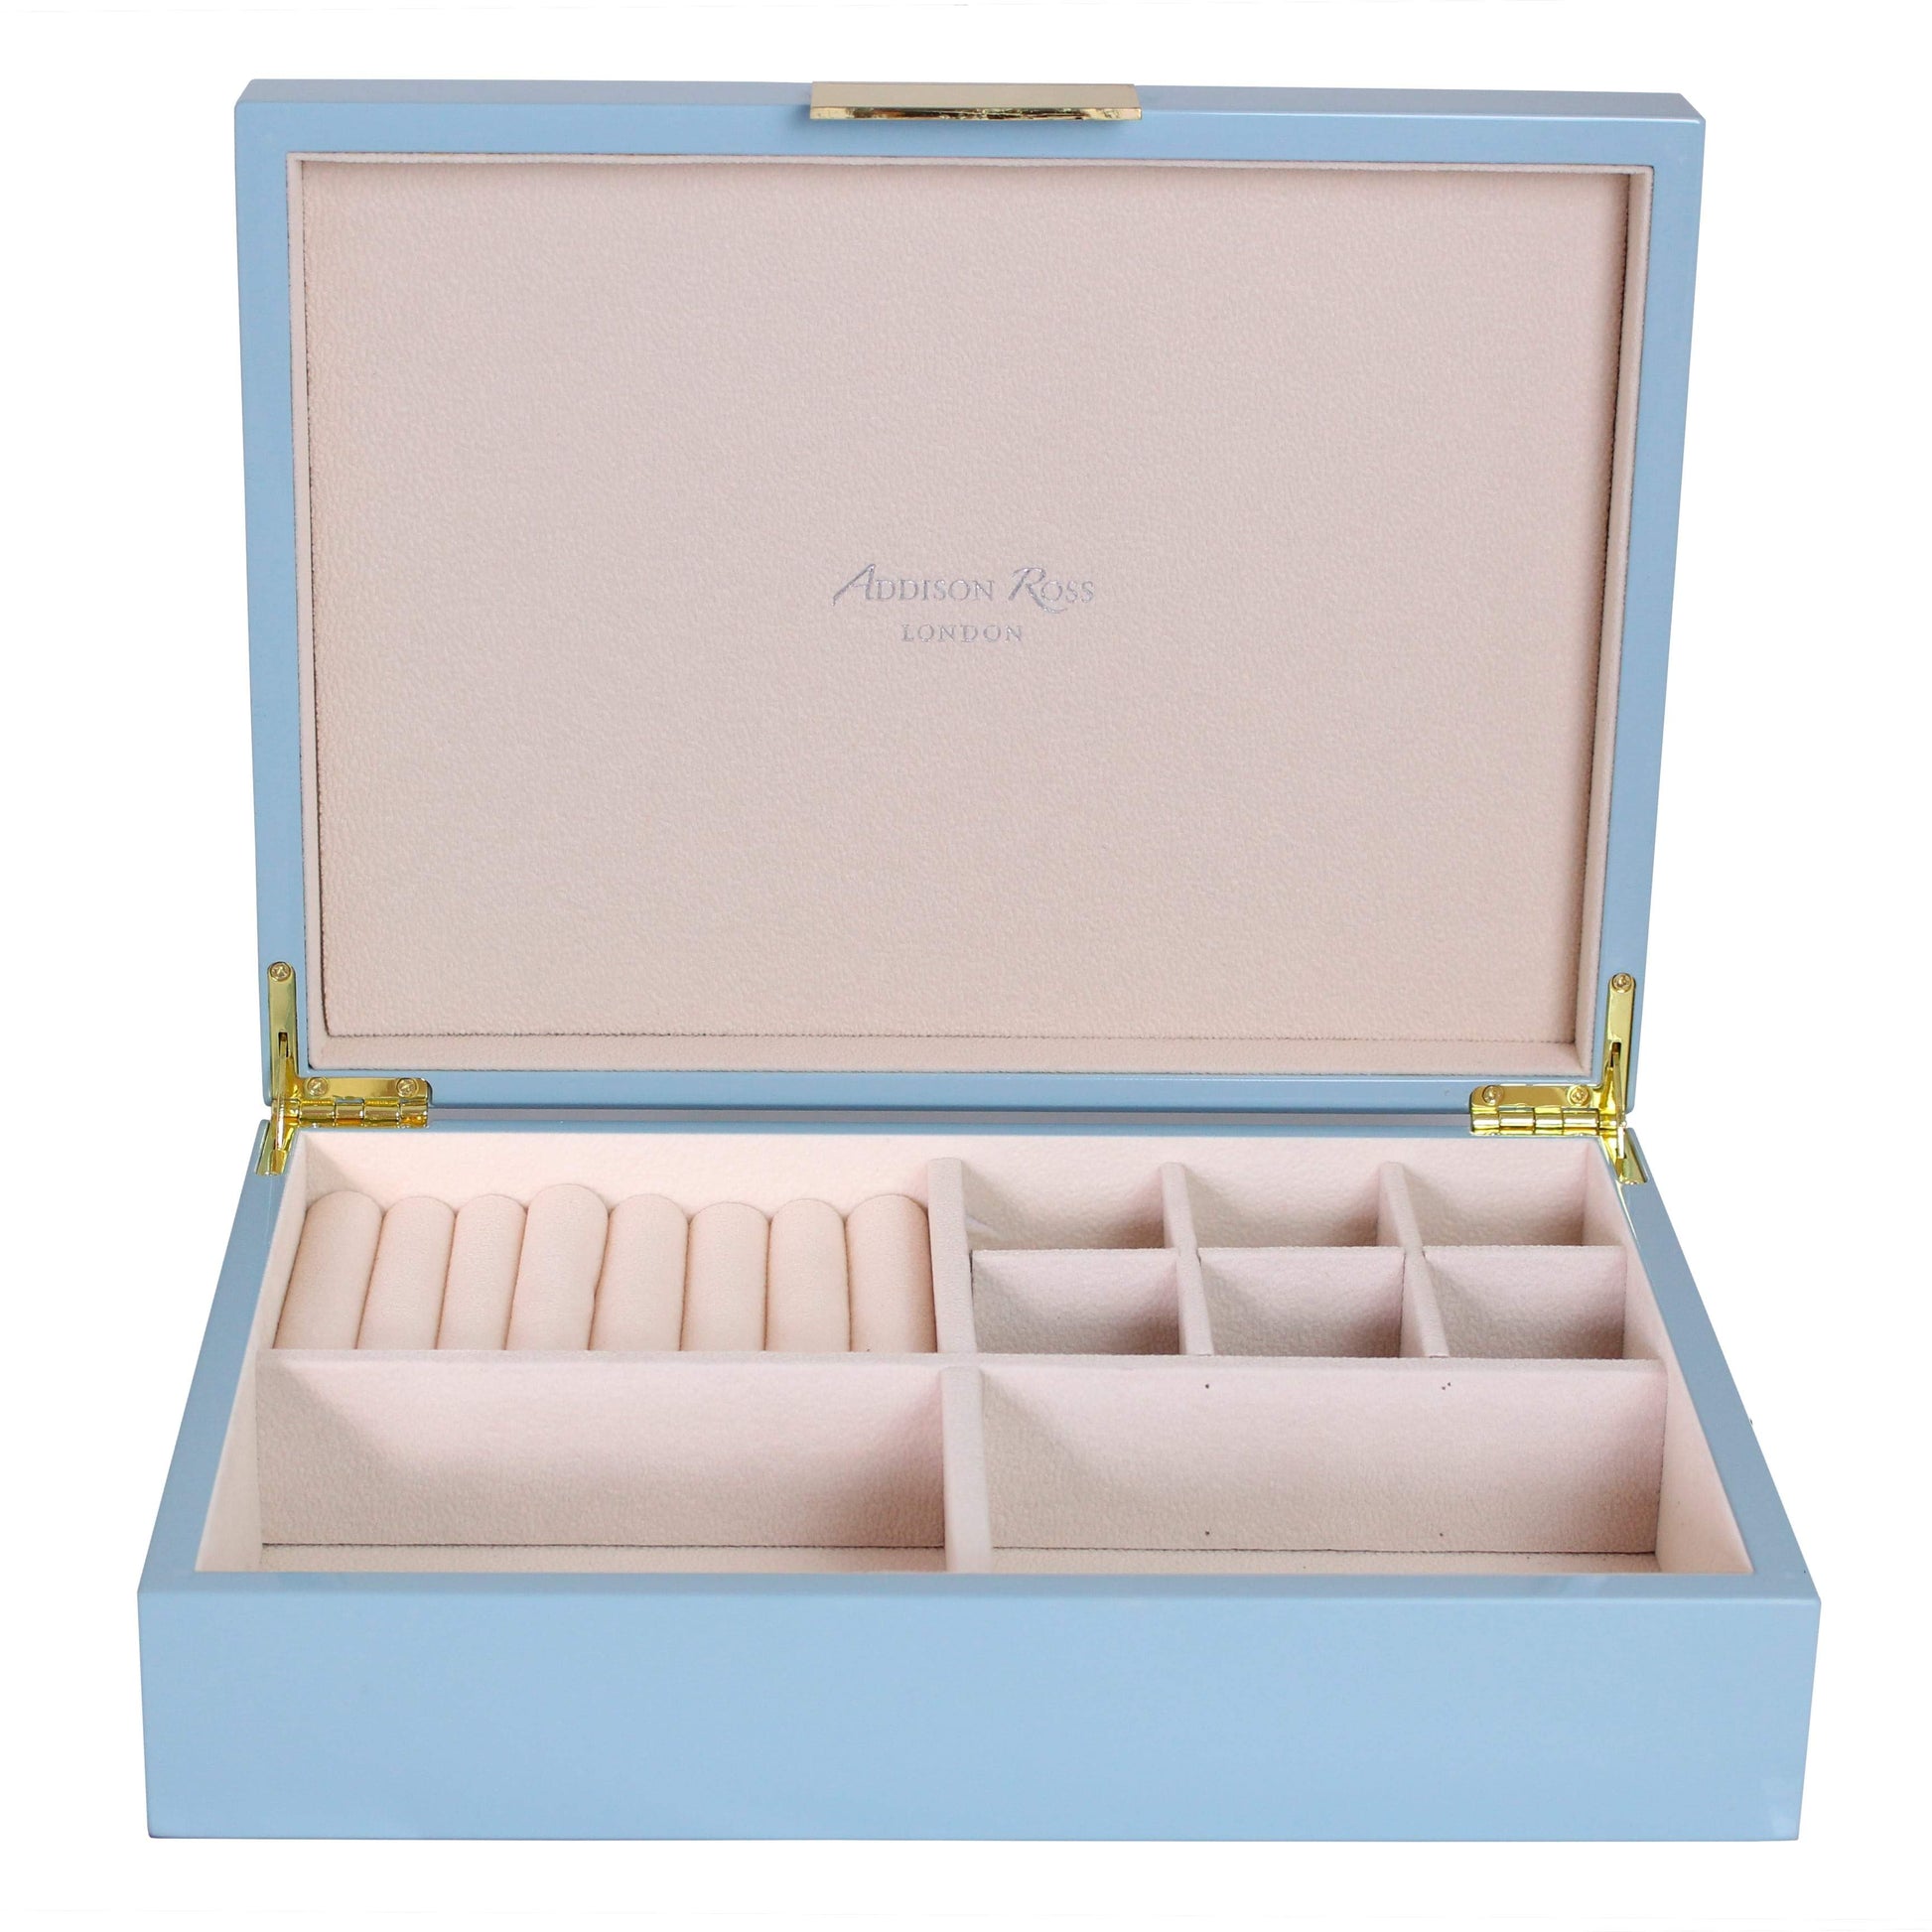 Large pale blue jewelry box with suede interior